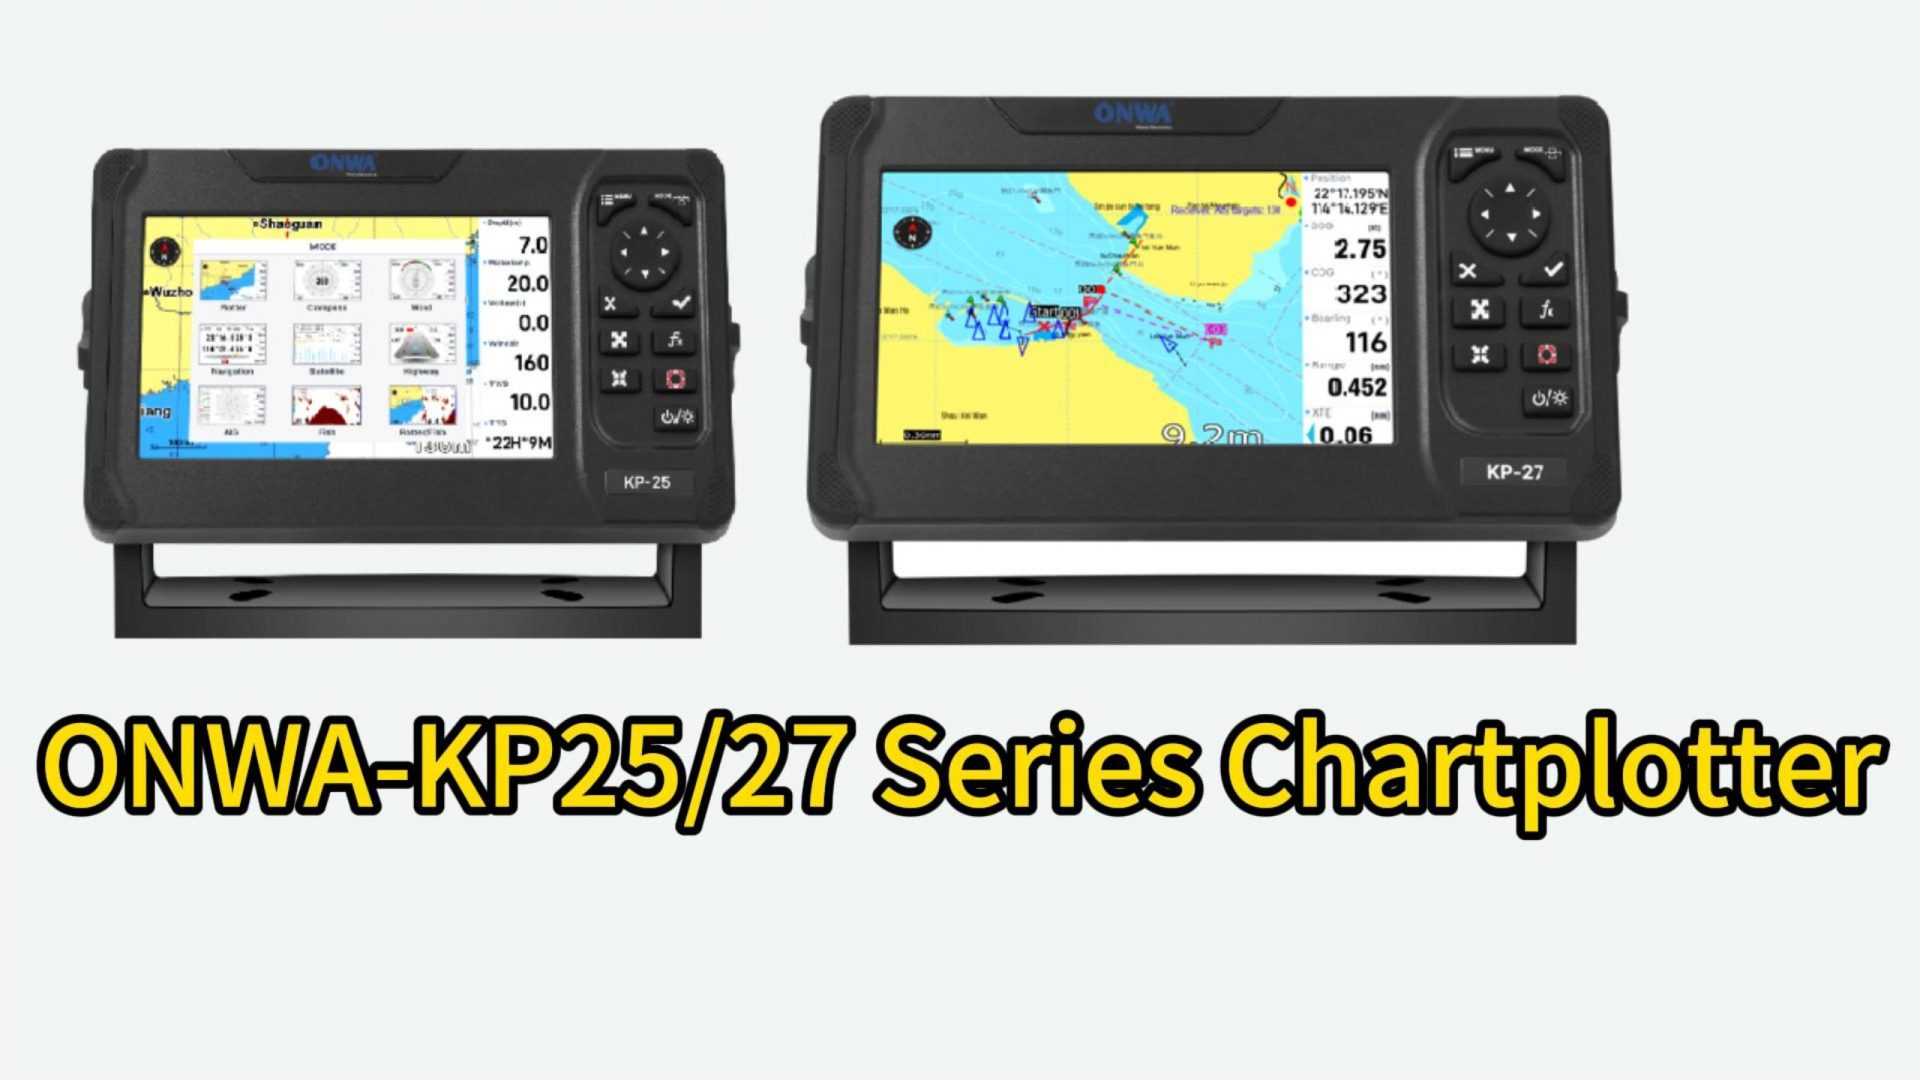 Unboxing of the ONWA KP-25/27 by 4-In-1 Chart Plotters